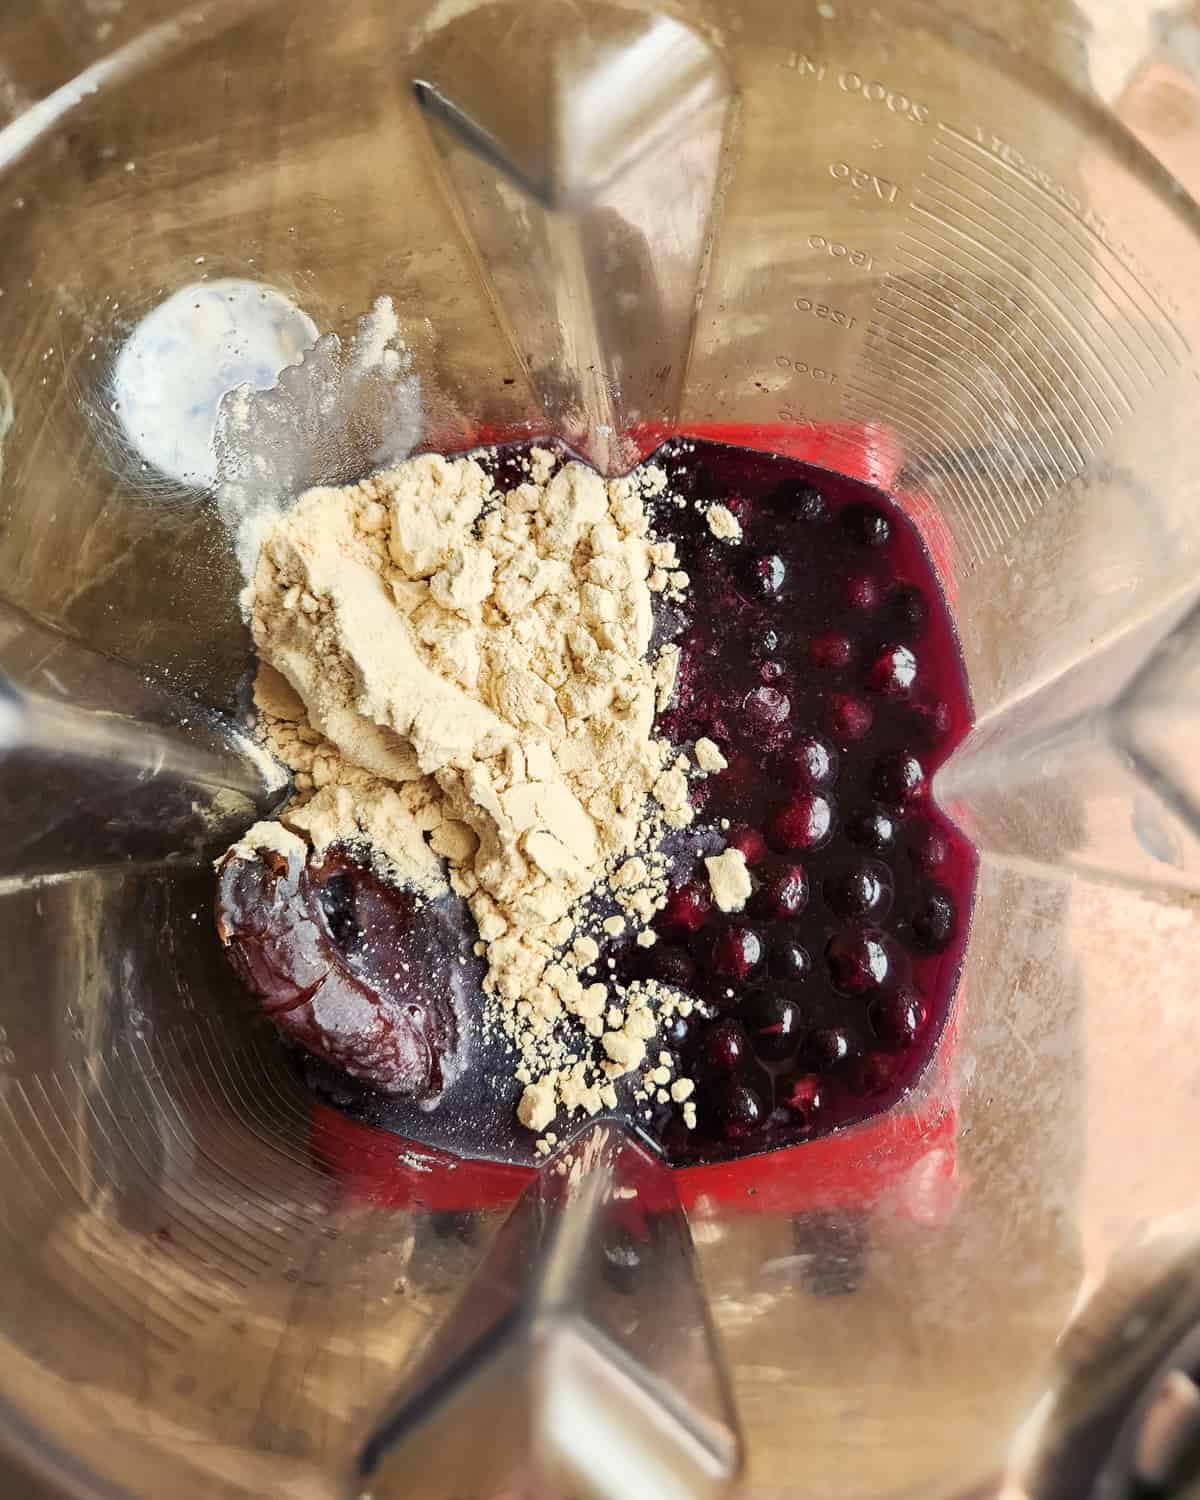 Image shows the inside of a high speed blender with frozen blueberries, protein powder, dates and water. The image is a process image to show how to make a high protein smoothie.